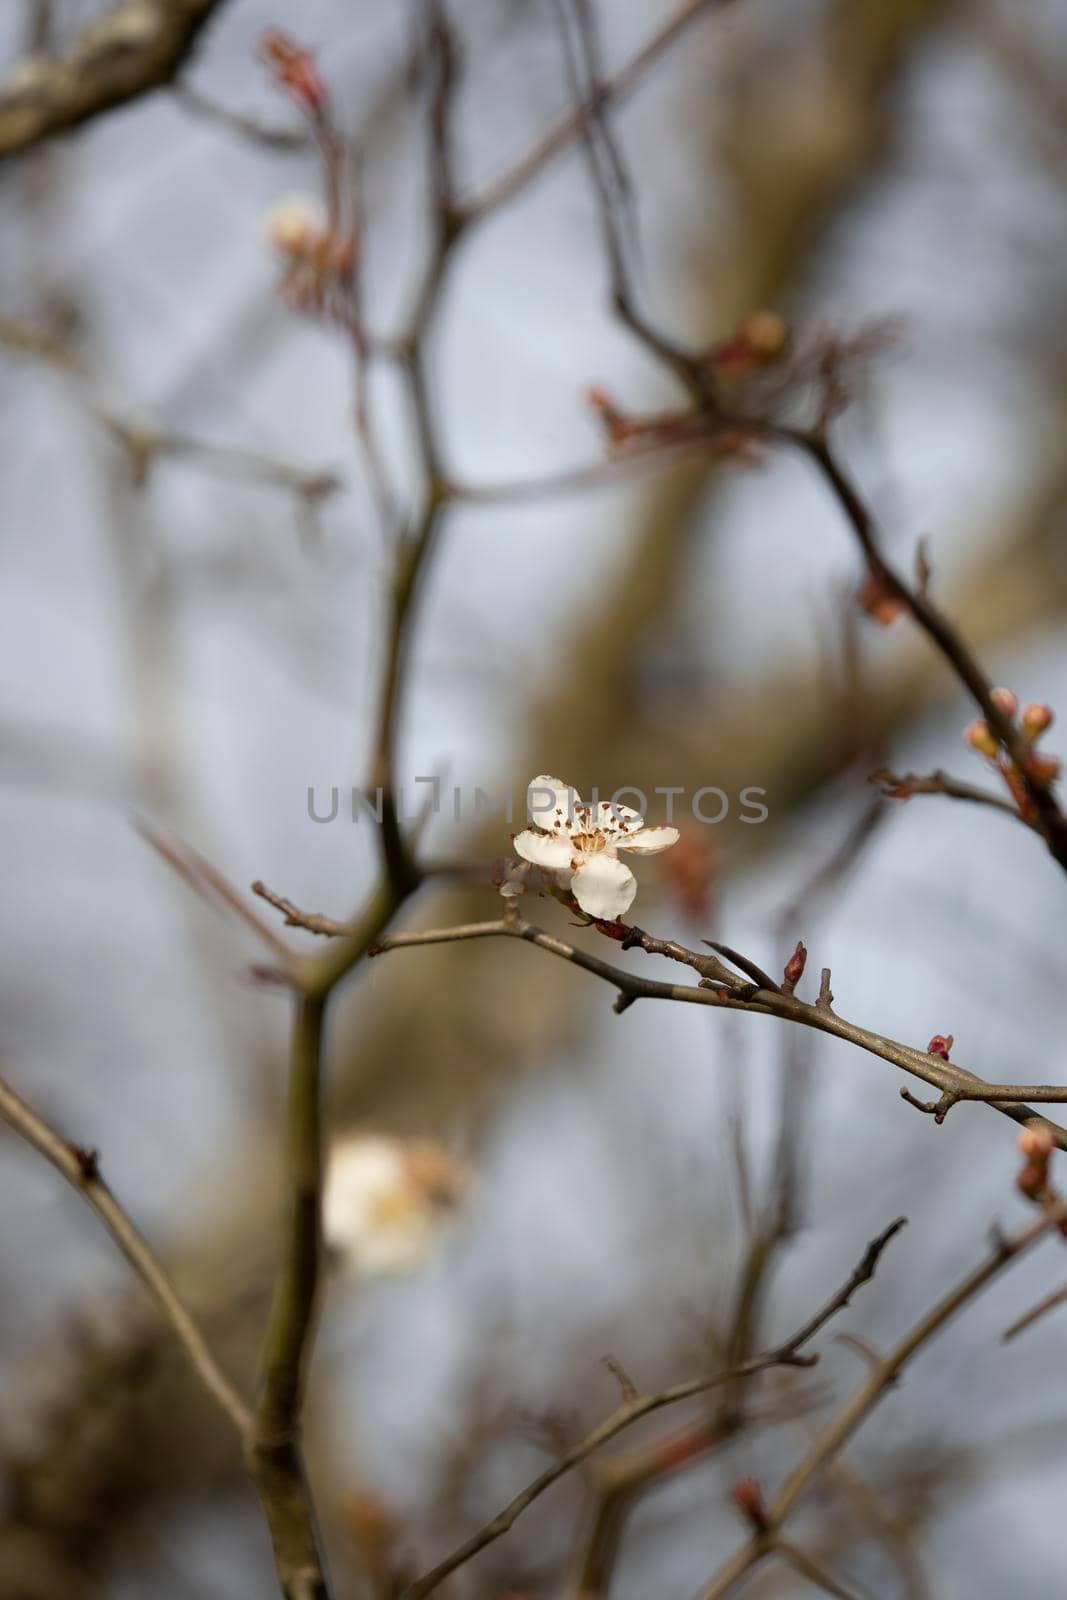 White Flower Blooming on a Bare Limb by tornado98